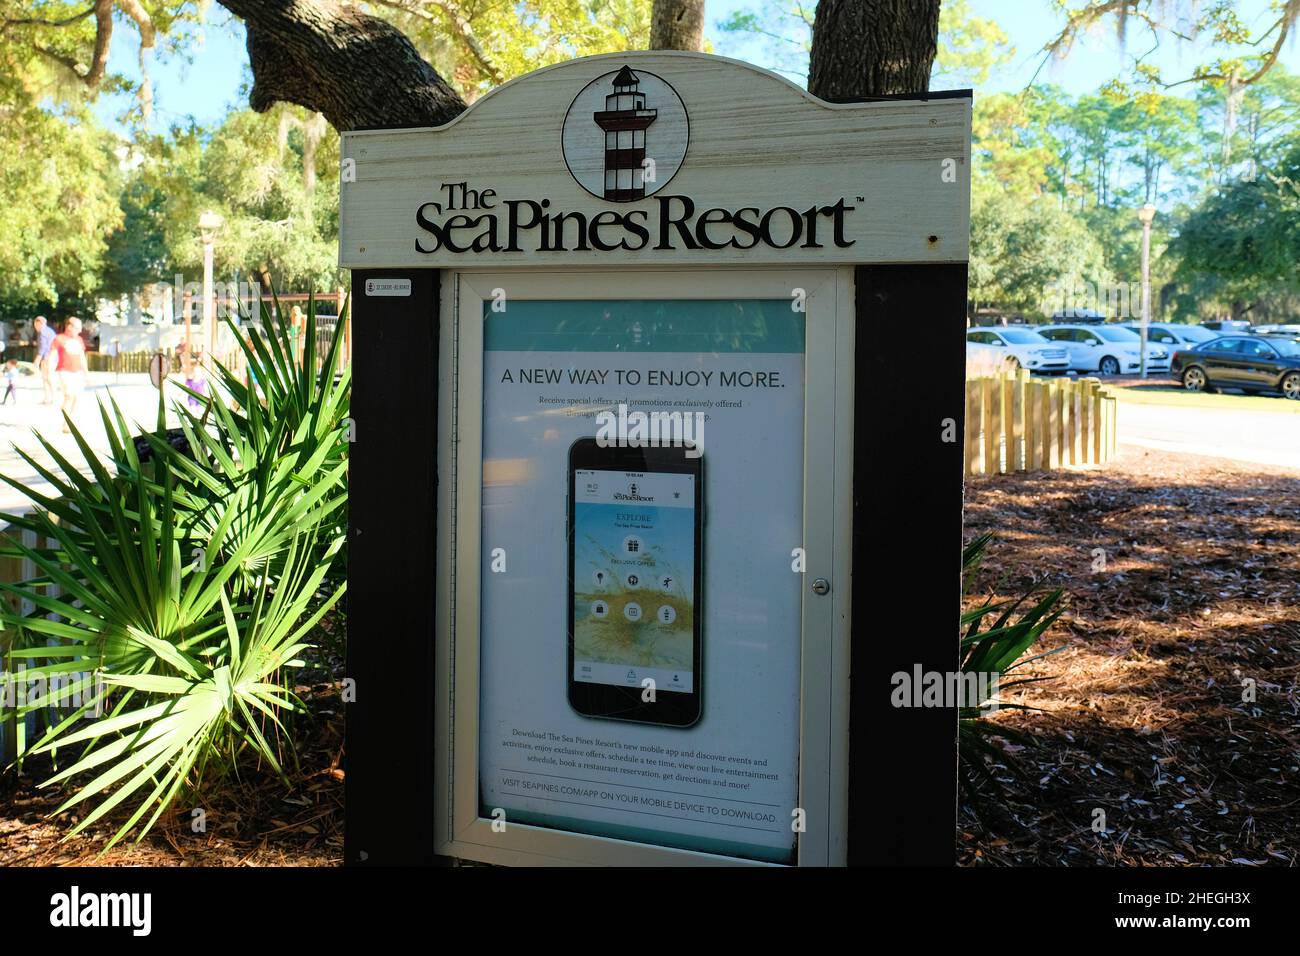 Information display case at The Sea Pines Resort in Hilton Head, South Carolina advertising a phone app to access local deals and services. Stock Photo